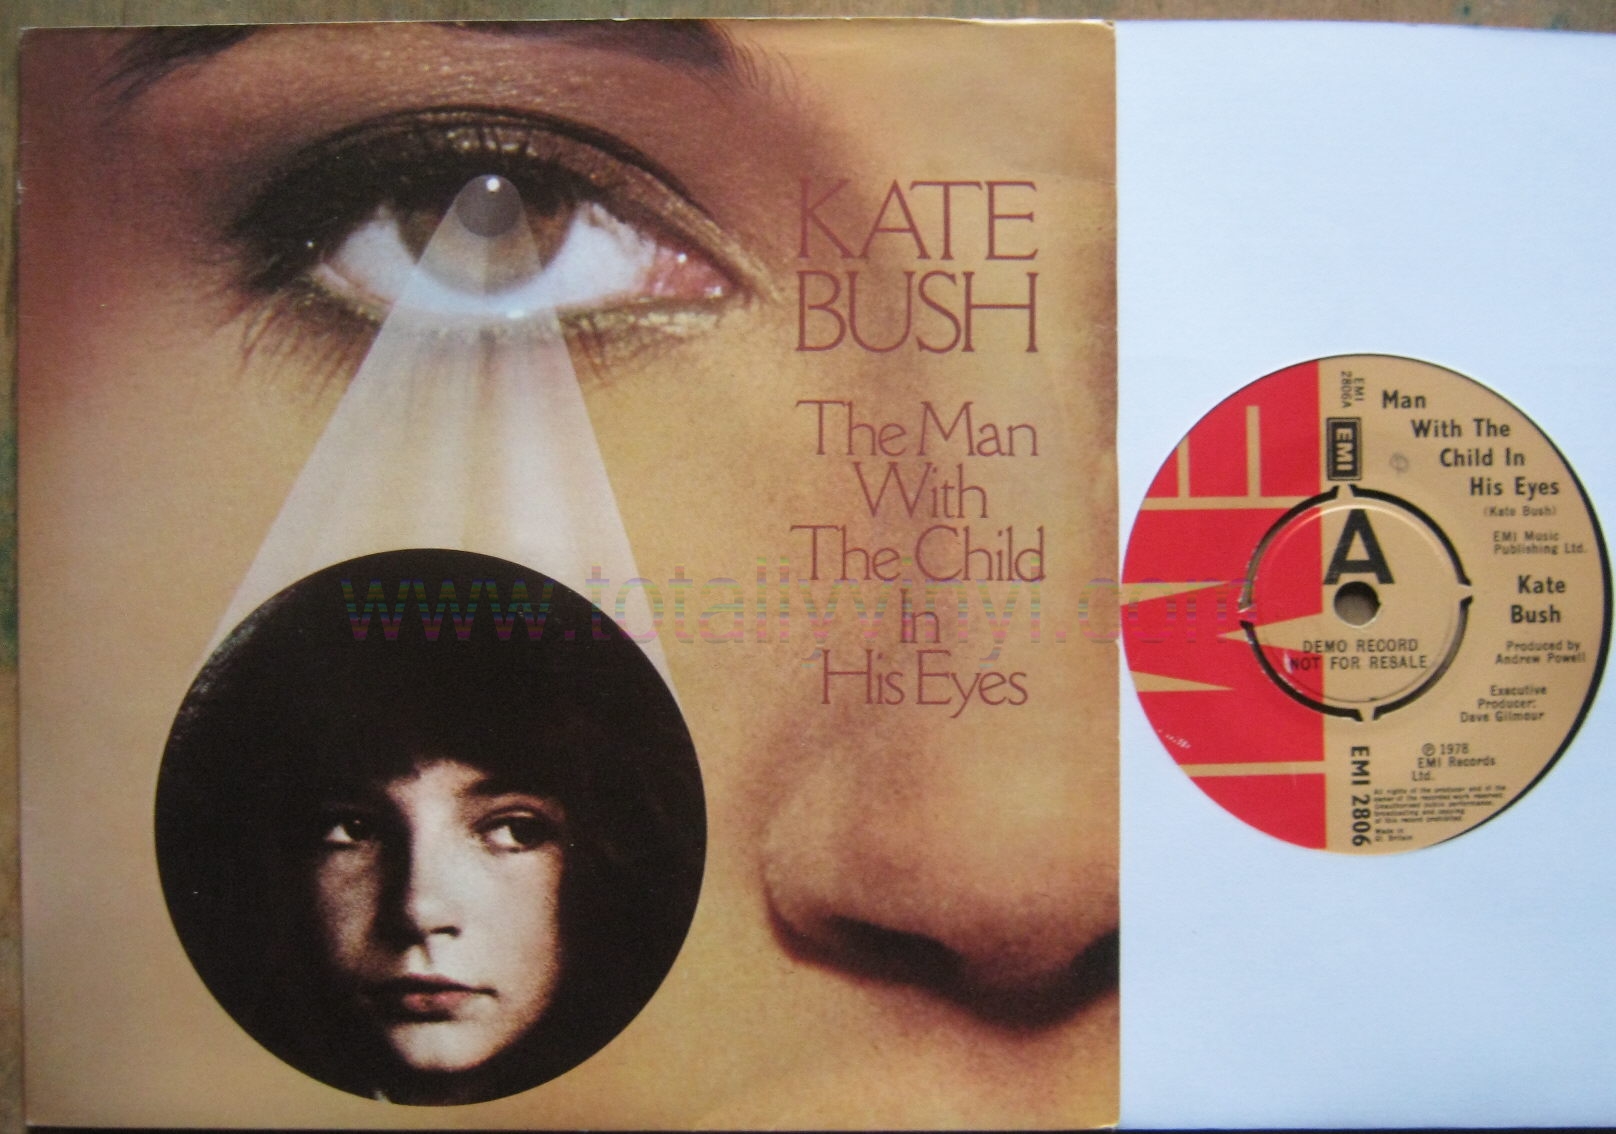 KATE_BUSH_THE_MAN_WITH_THE_CHILD_IN_HIS_EYES_DJ_7_PIC.jpg